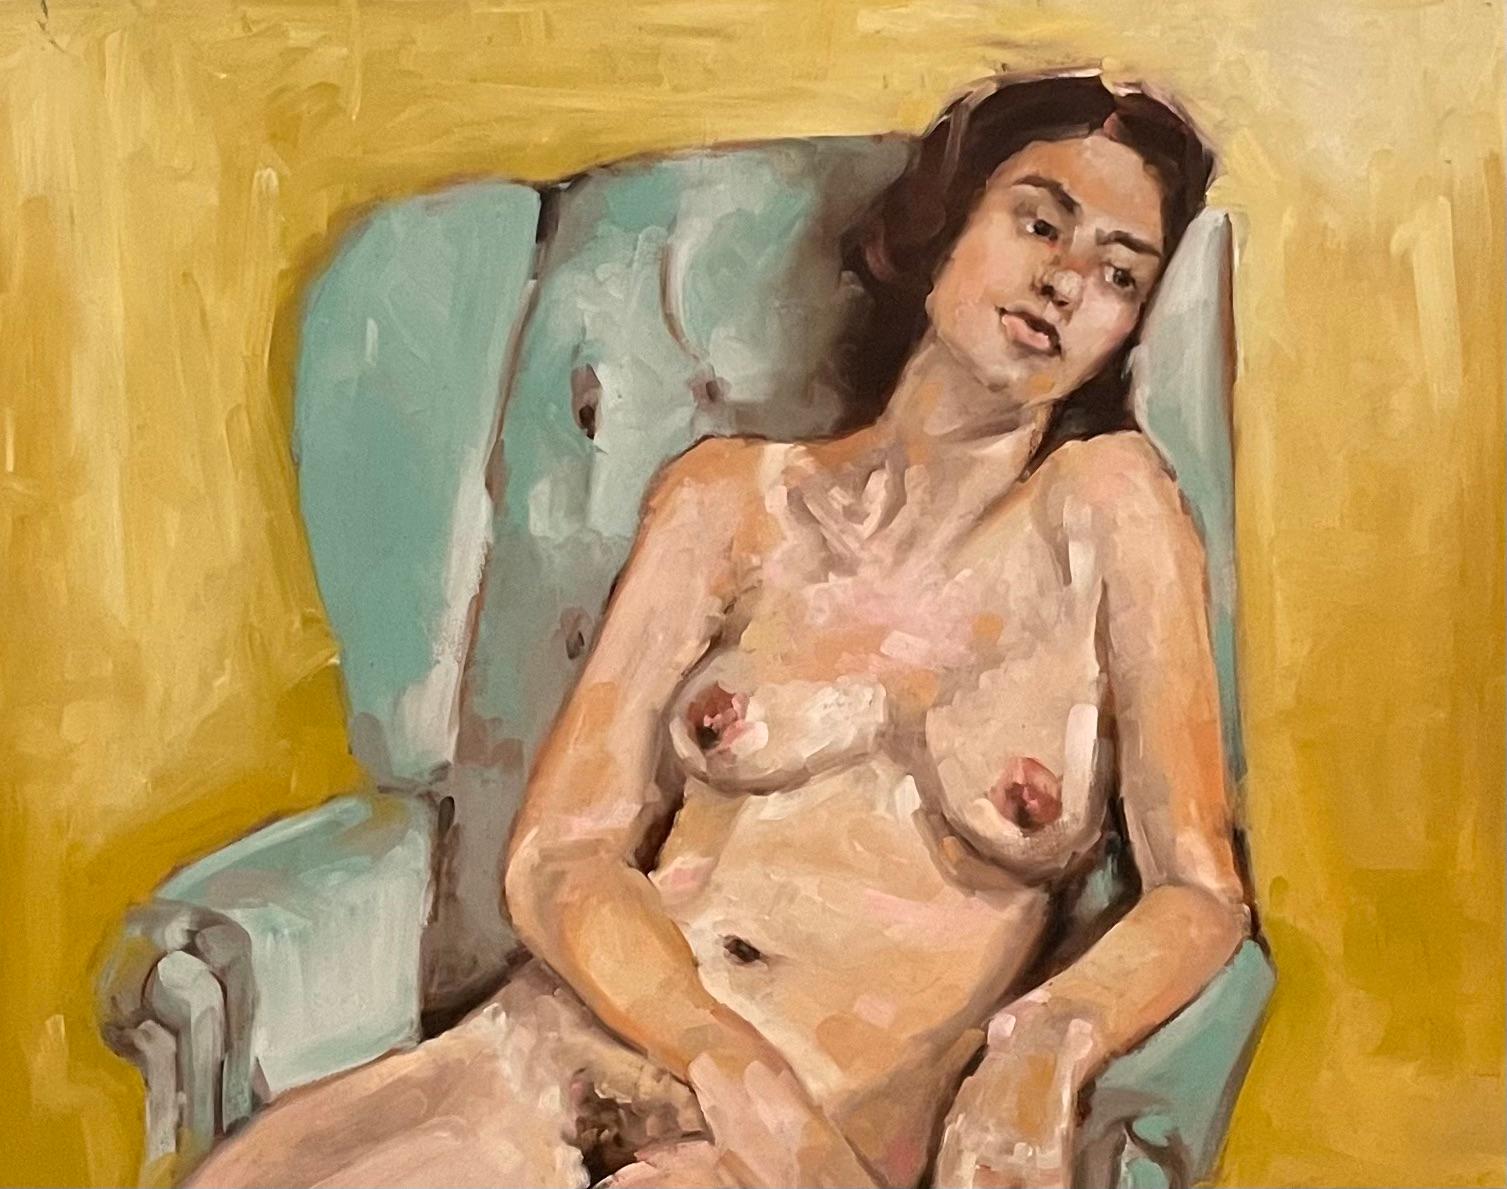 Shana Wilson's "Young Woman on Blue Chair" is a 16" x 20" (26.5x30.5 Framed) masterpiece that captures the essence of contentment and relaxation. The young nude woman, with brown hair and a tranquil expression, sits on a light blue chair against a